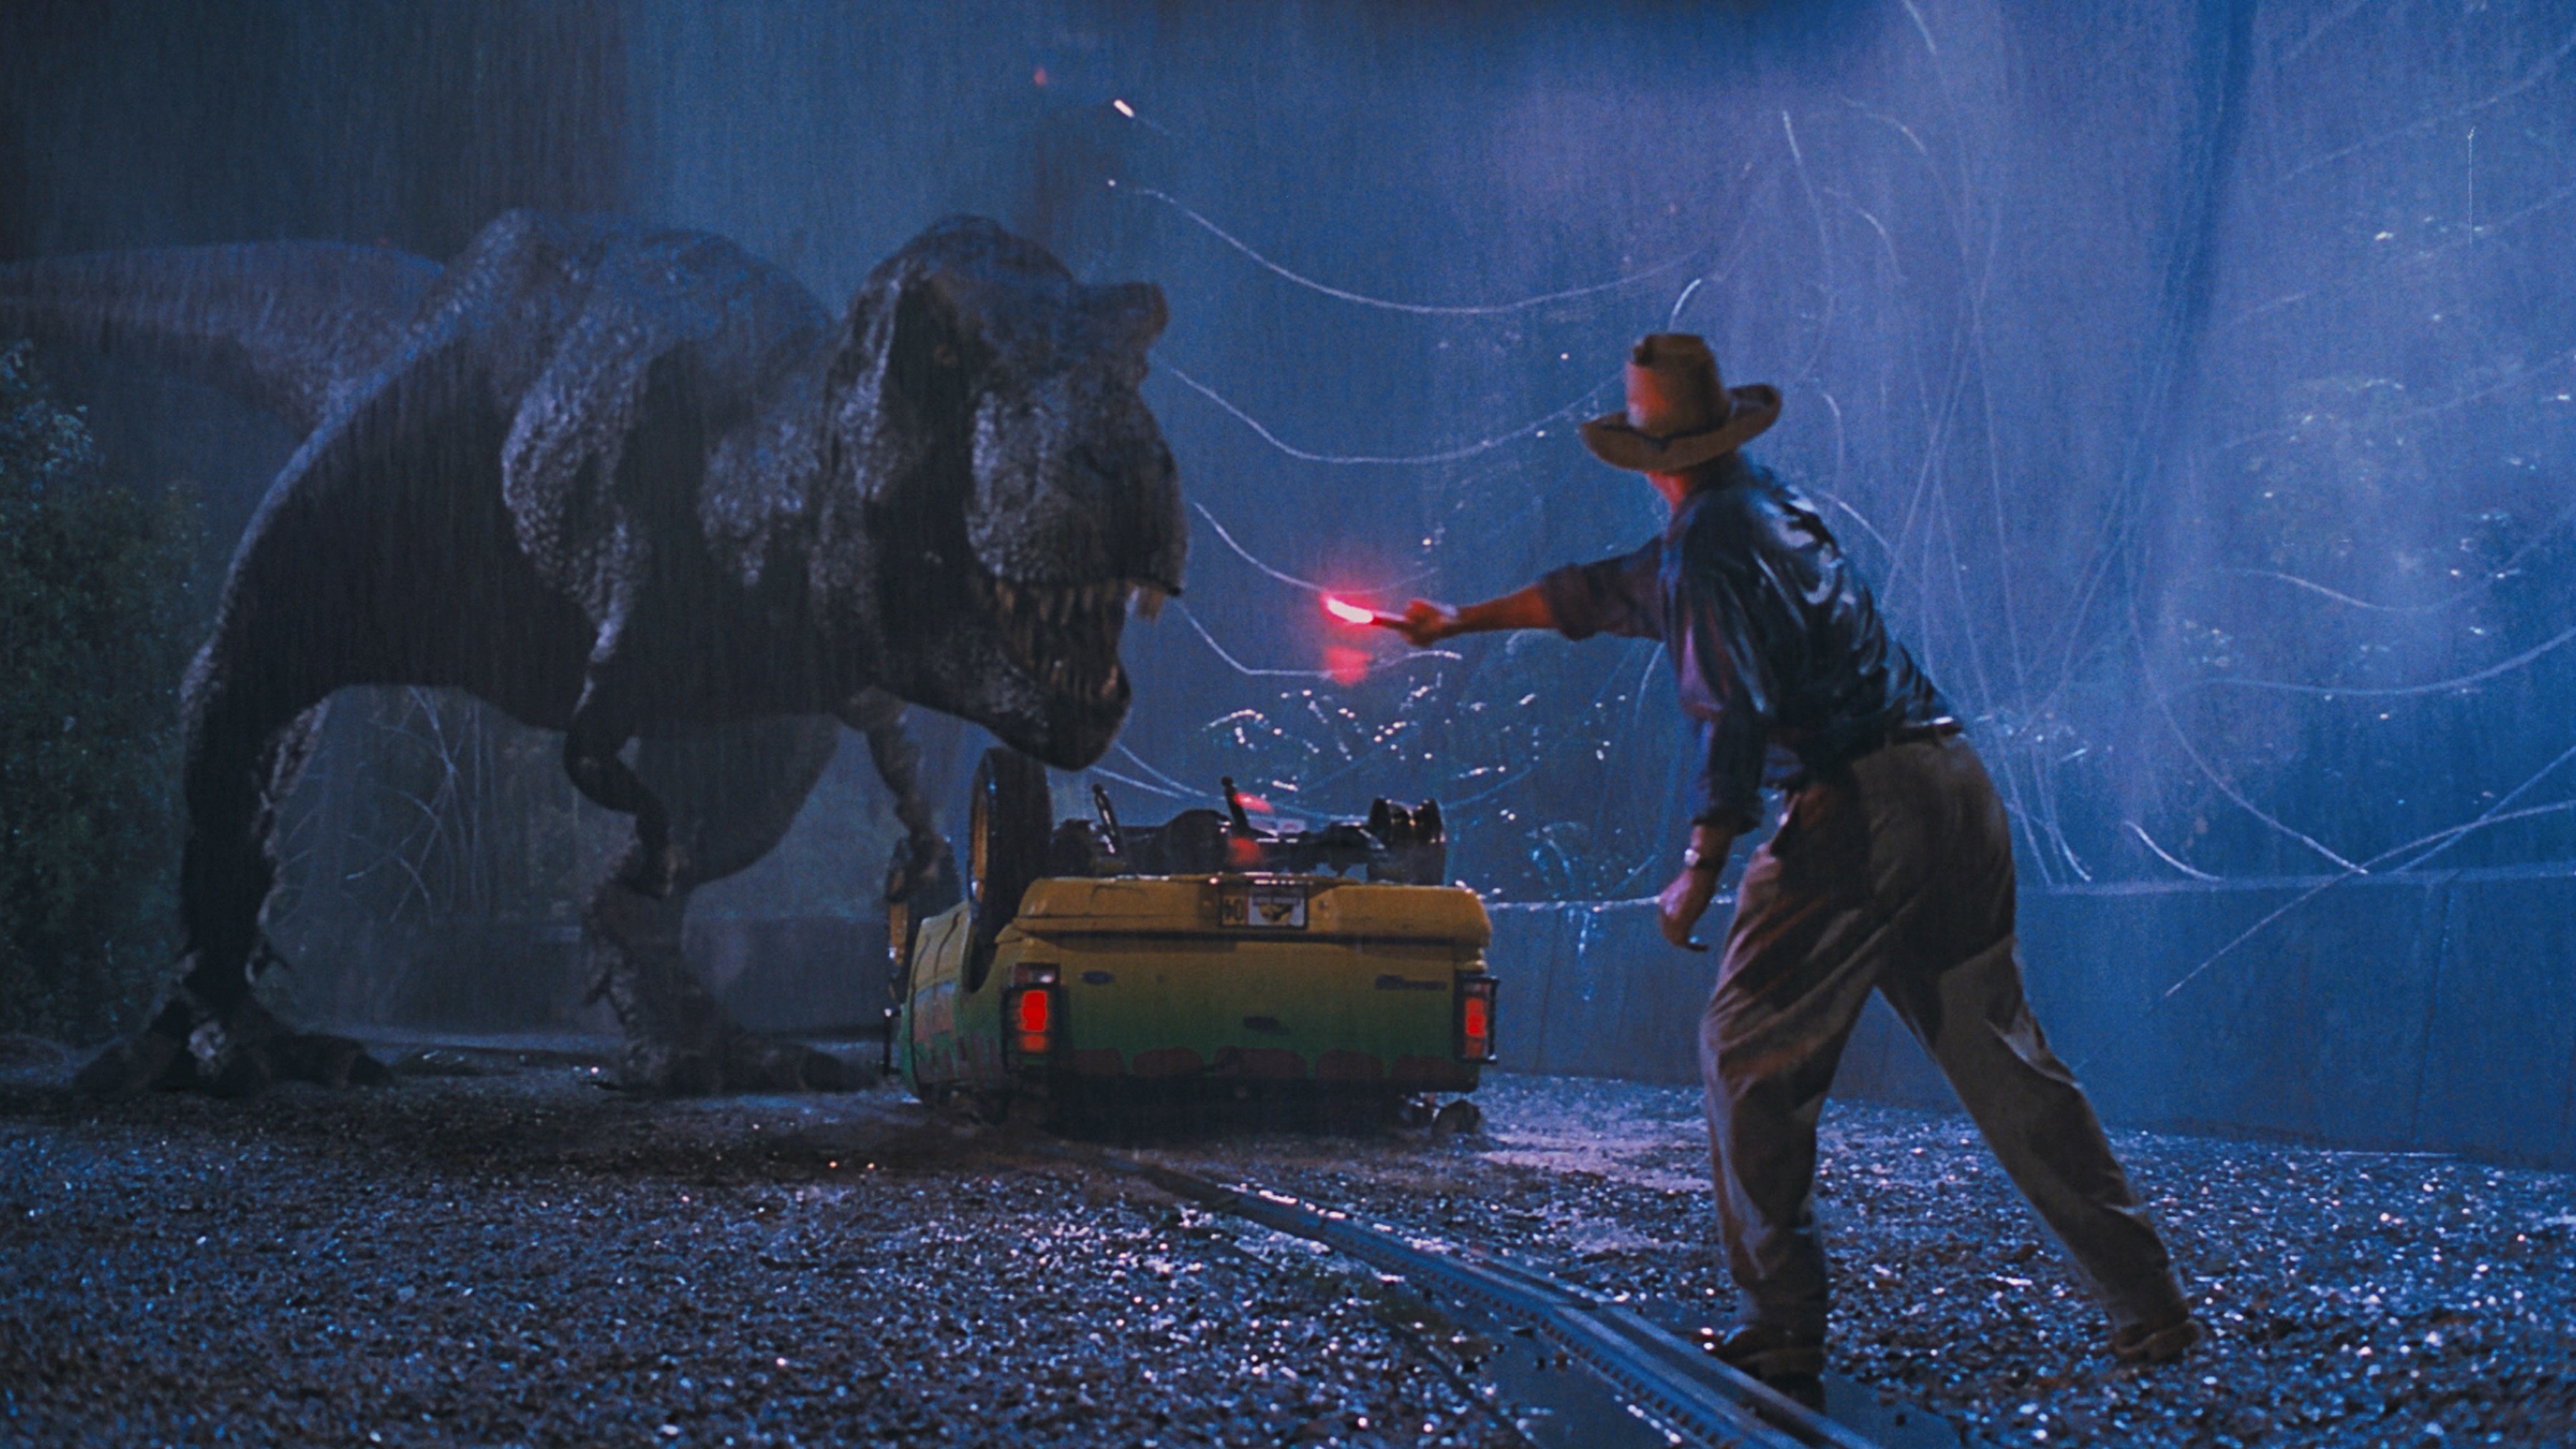 3600x2025 px jurassic park wallpaper for mac computers by Harlan Bishop